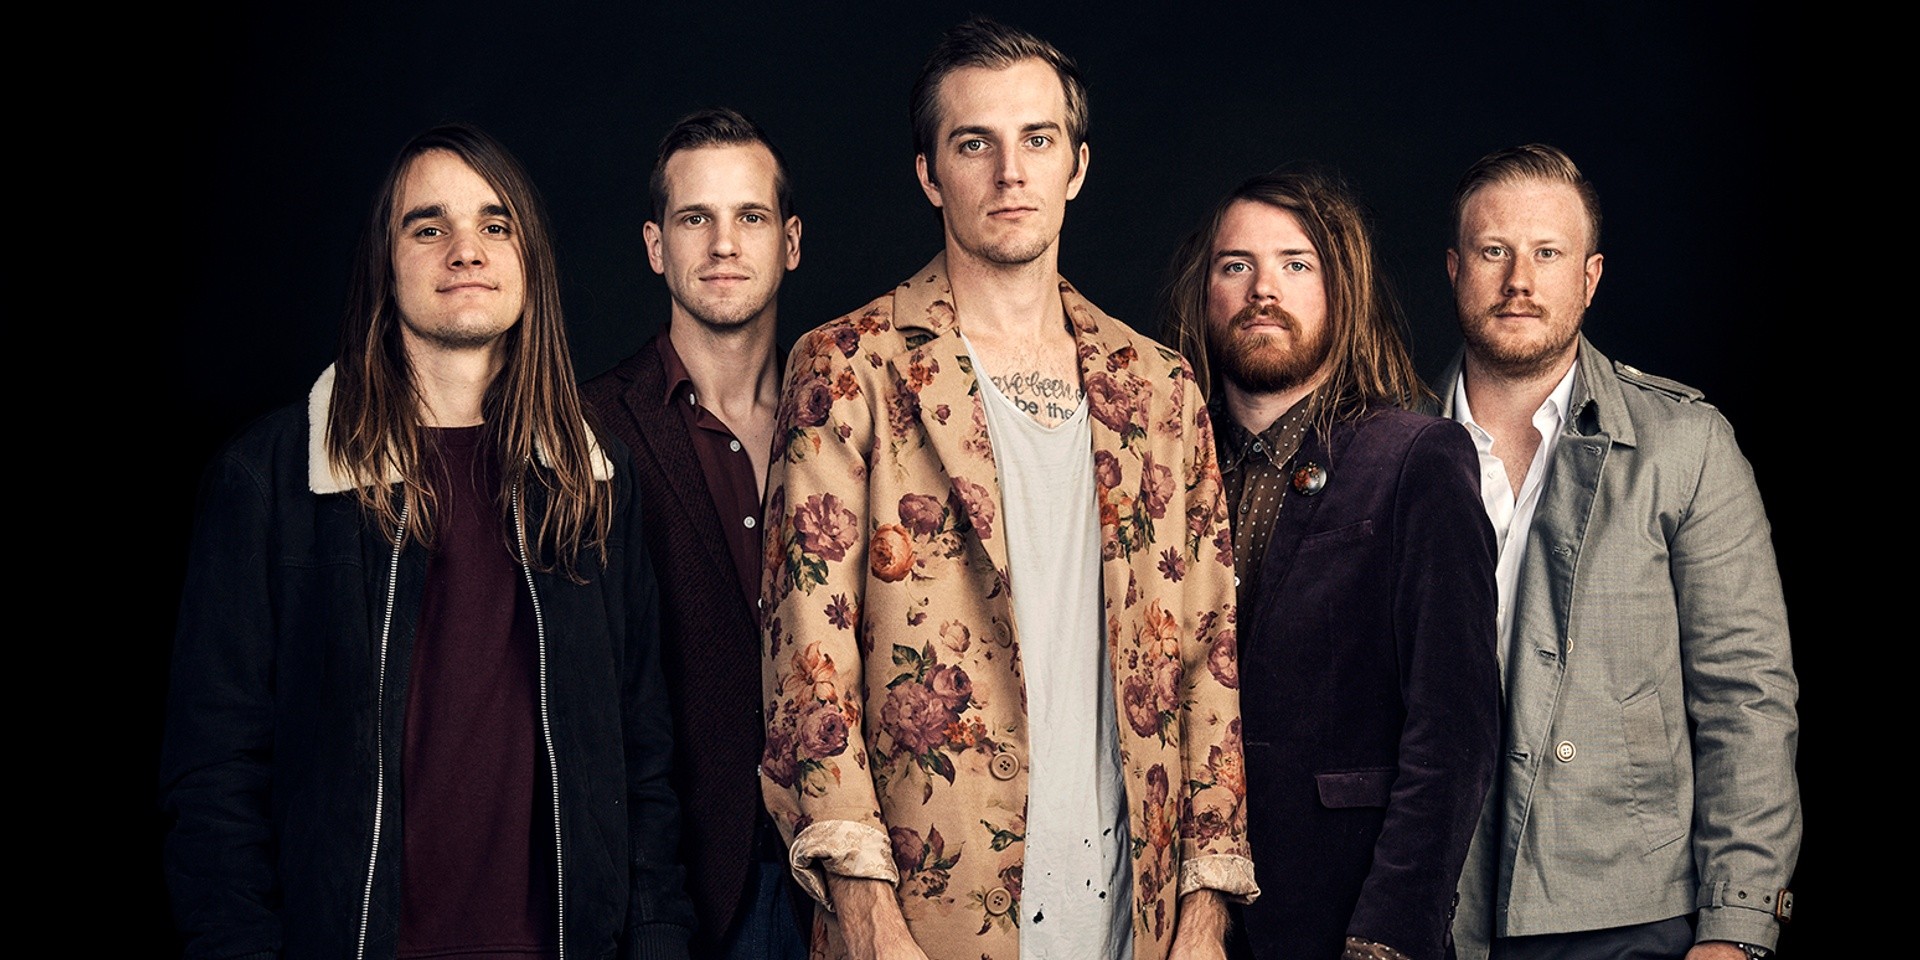 The Maine to perform in Singapore this September